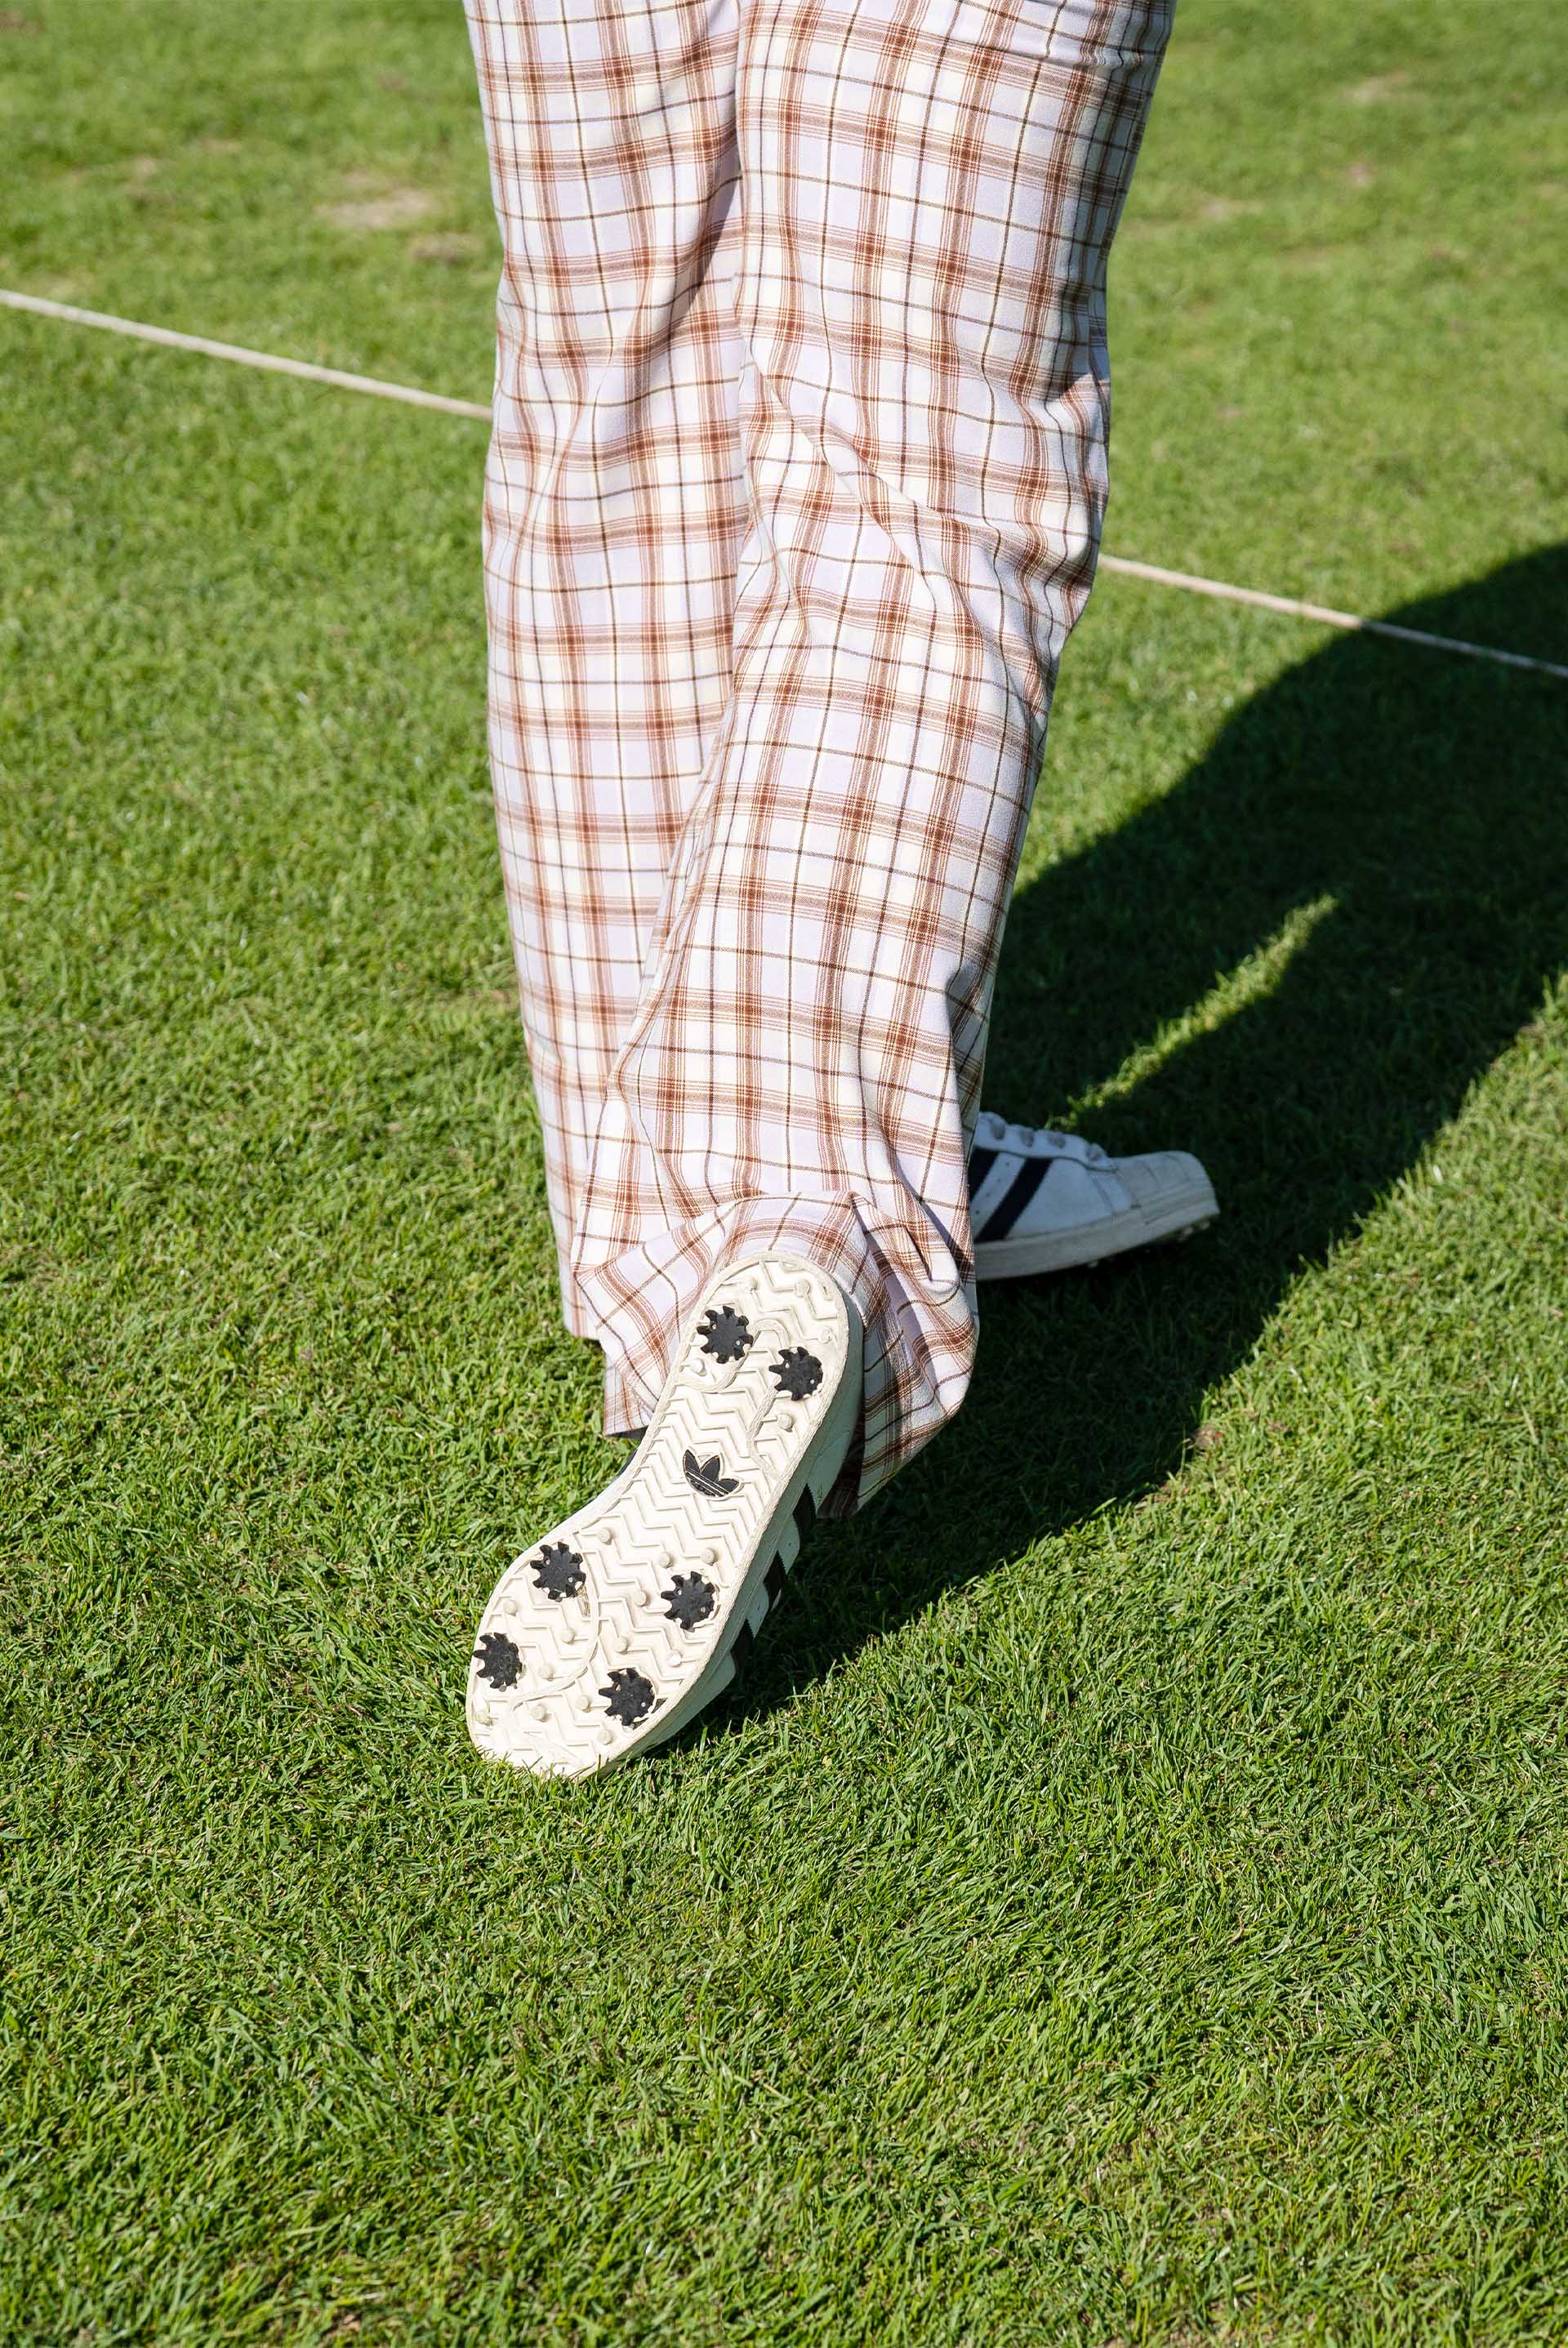 A detail shot of the check golf pants and sneakers that Mullins wears on the course.